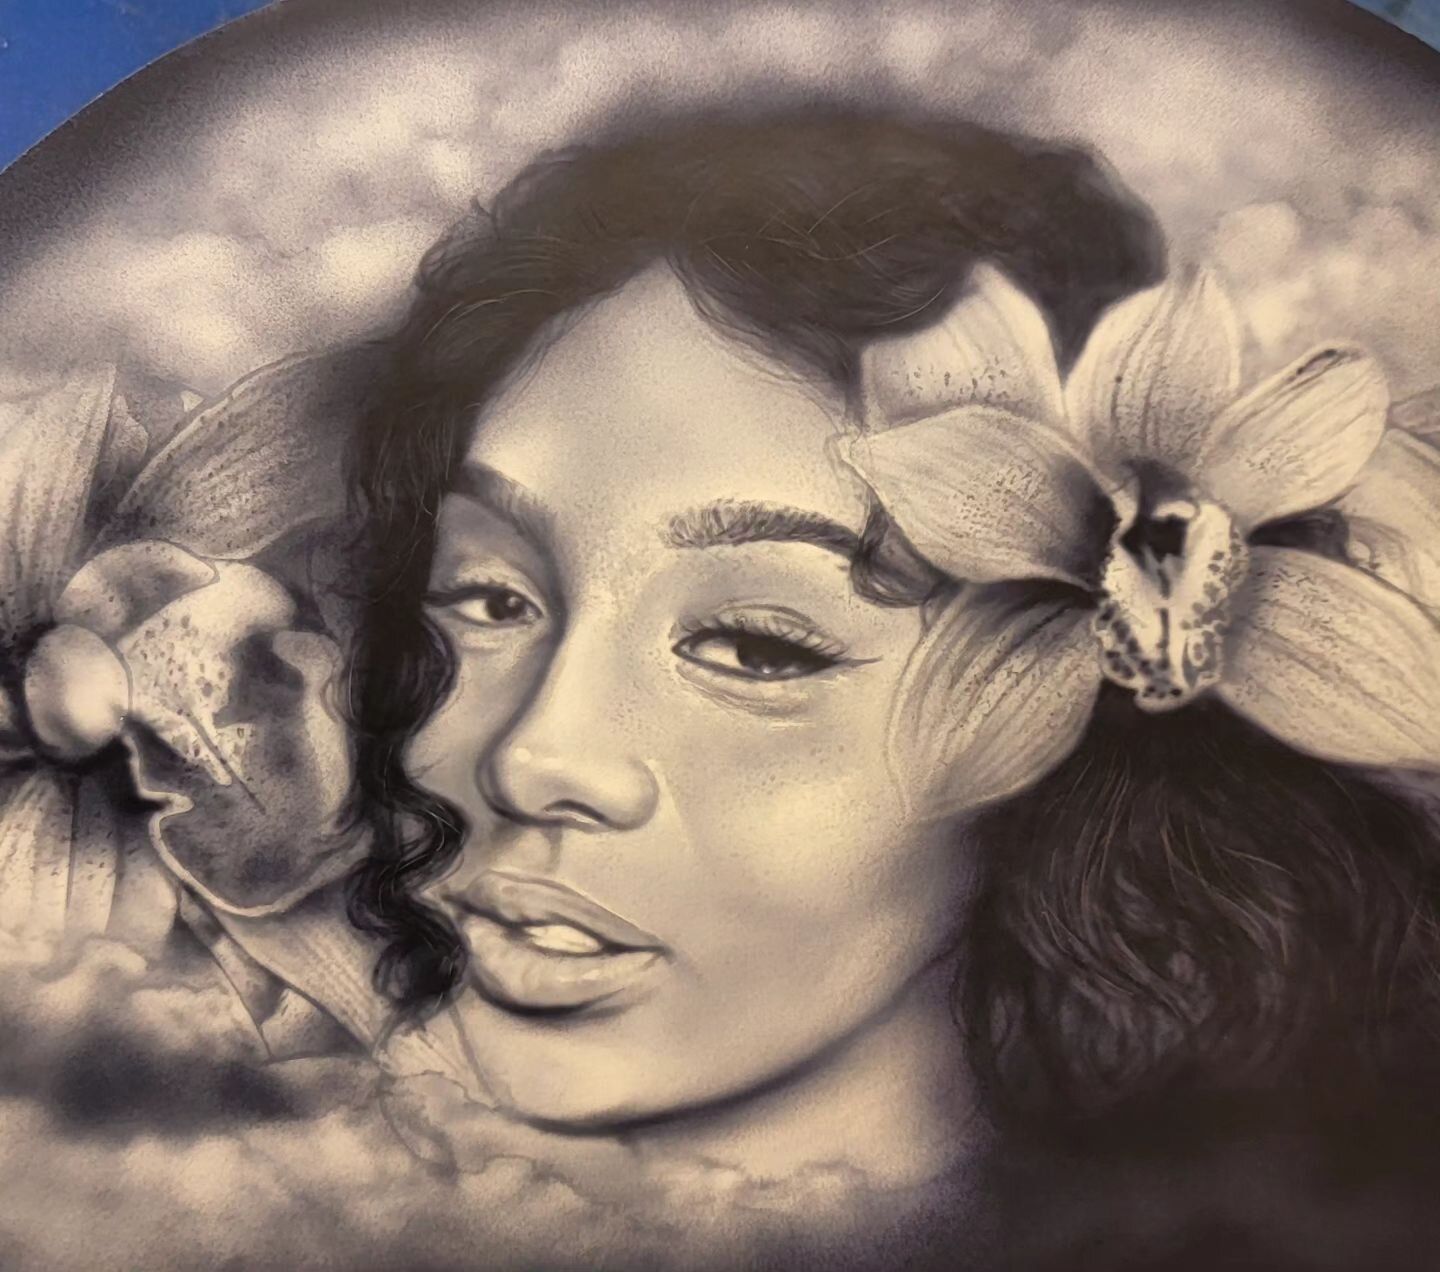 Small mural ready for candy and back home. 🍬 

Book your mural appointment at www.sunnytheartist.com 

#muralart #airbrush #lowrider #orchid #mural